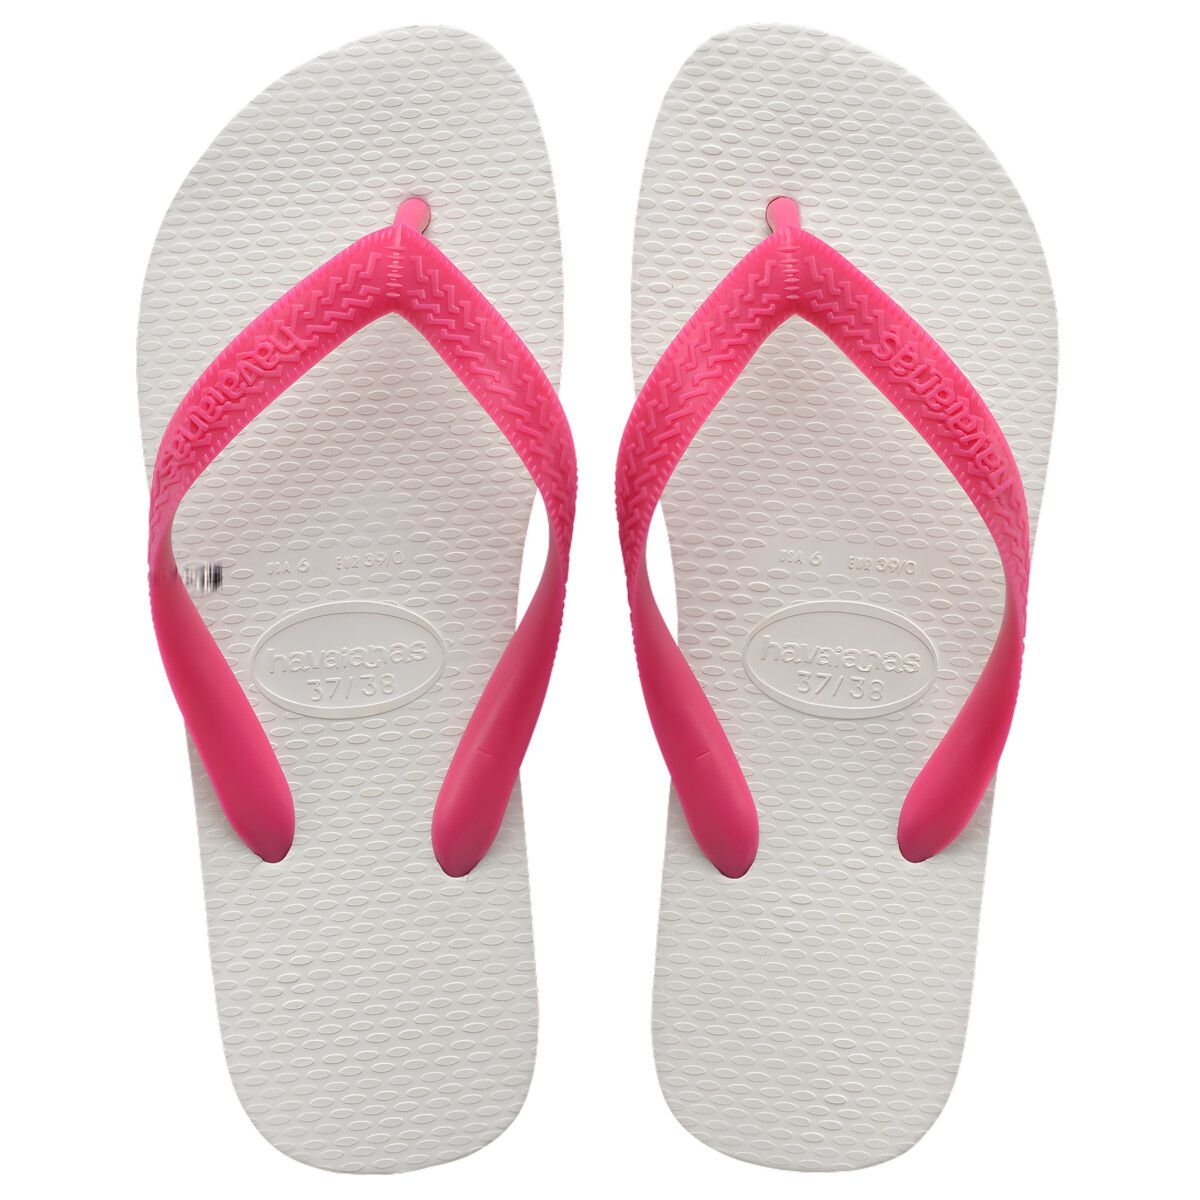 Chinelo Rosa Flux Tradicional Havaianas  n° 41/42 image number 0